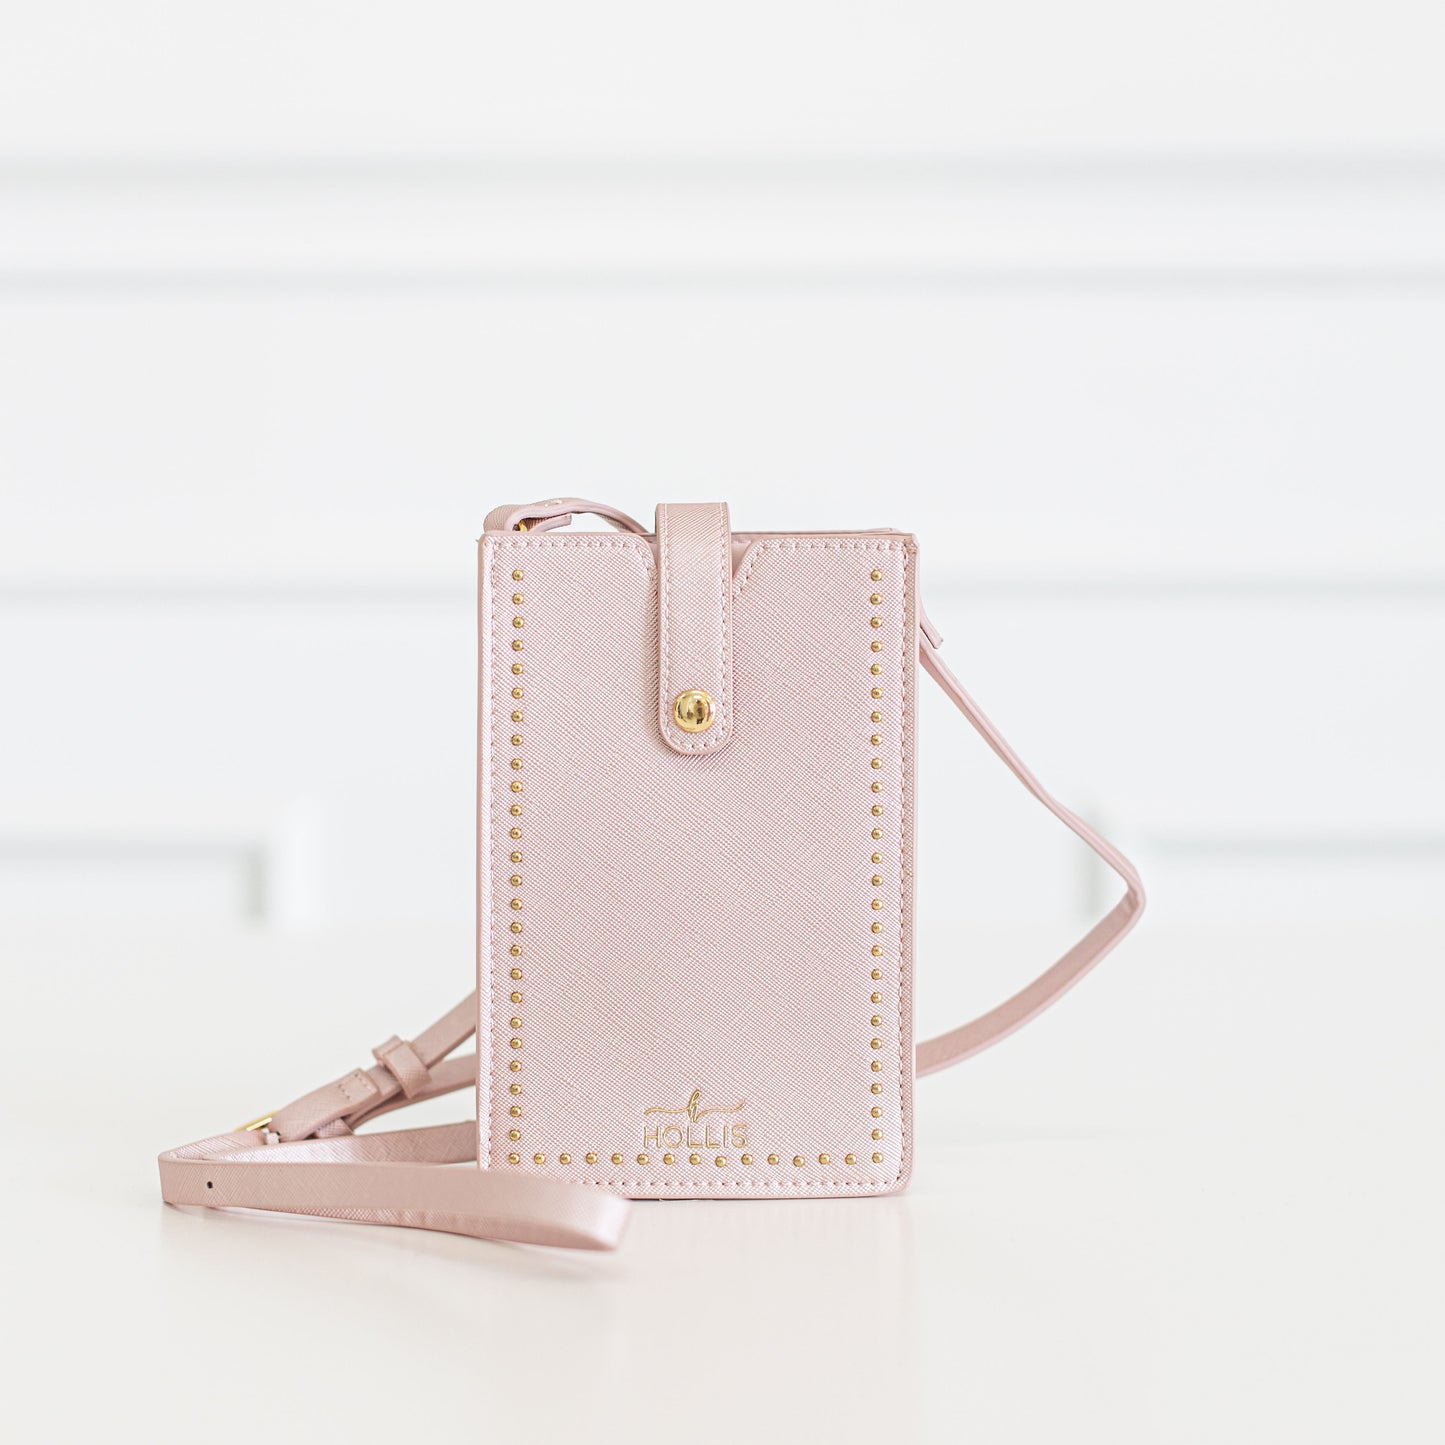 Call You Later Crossbody